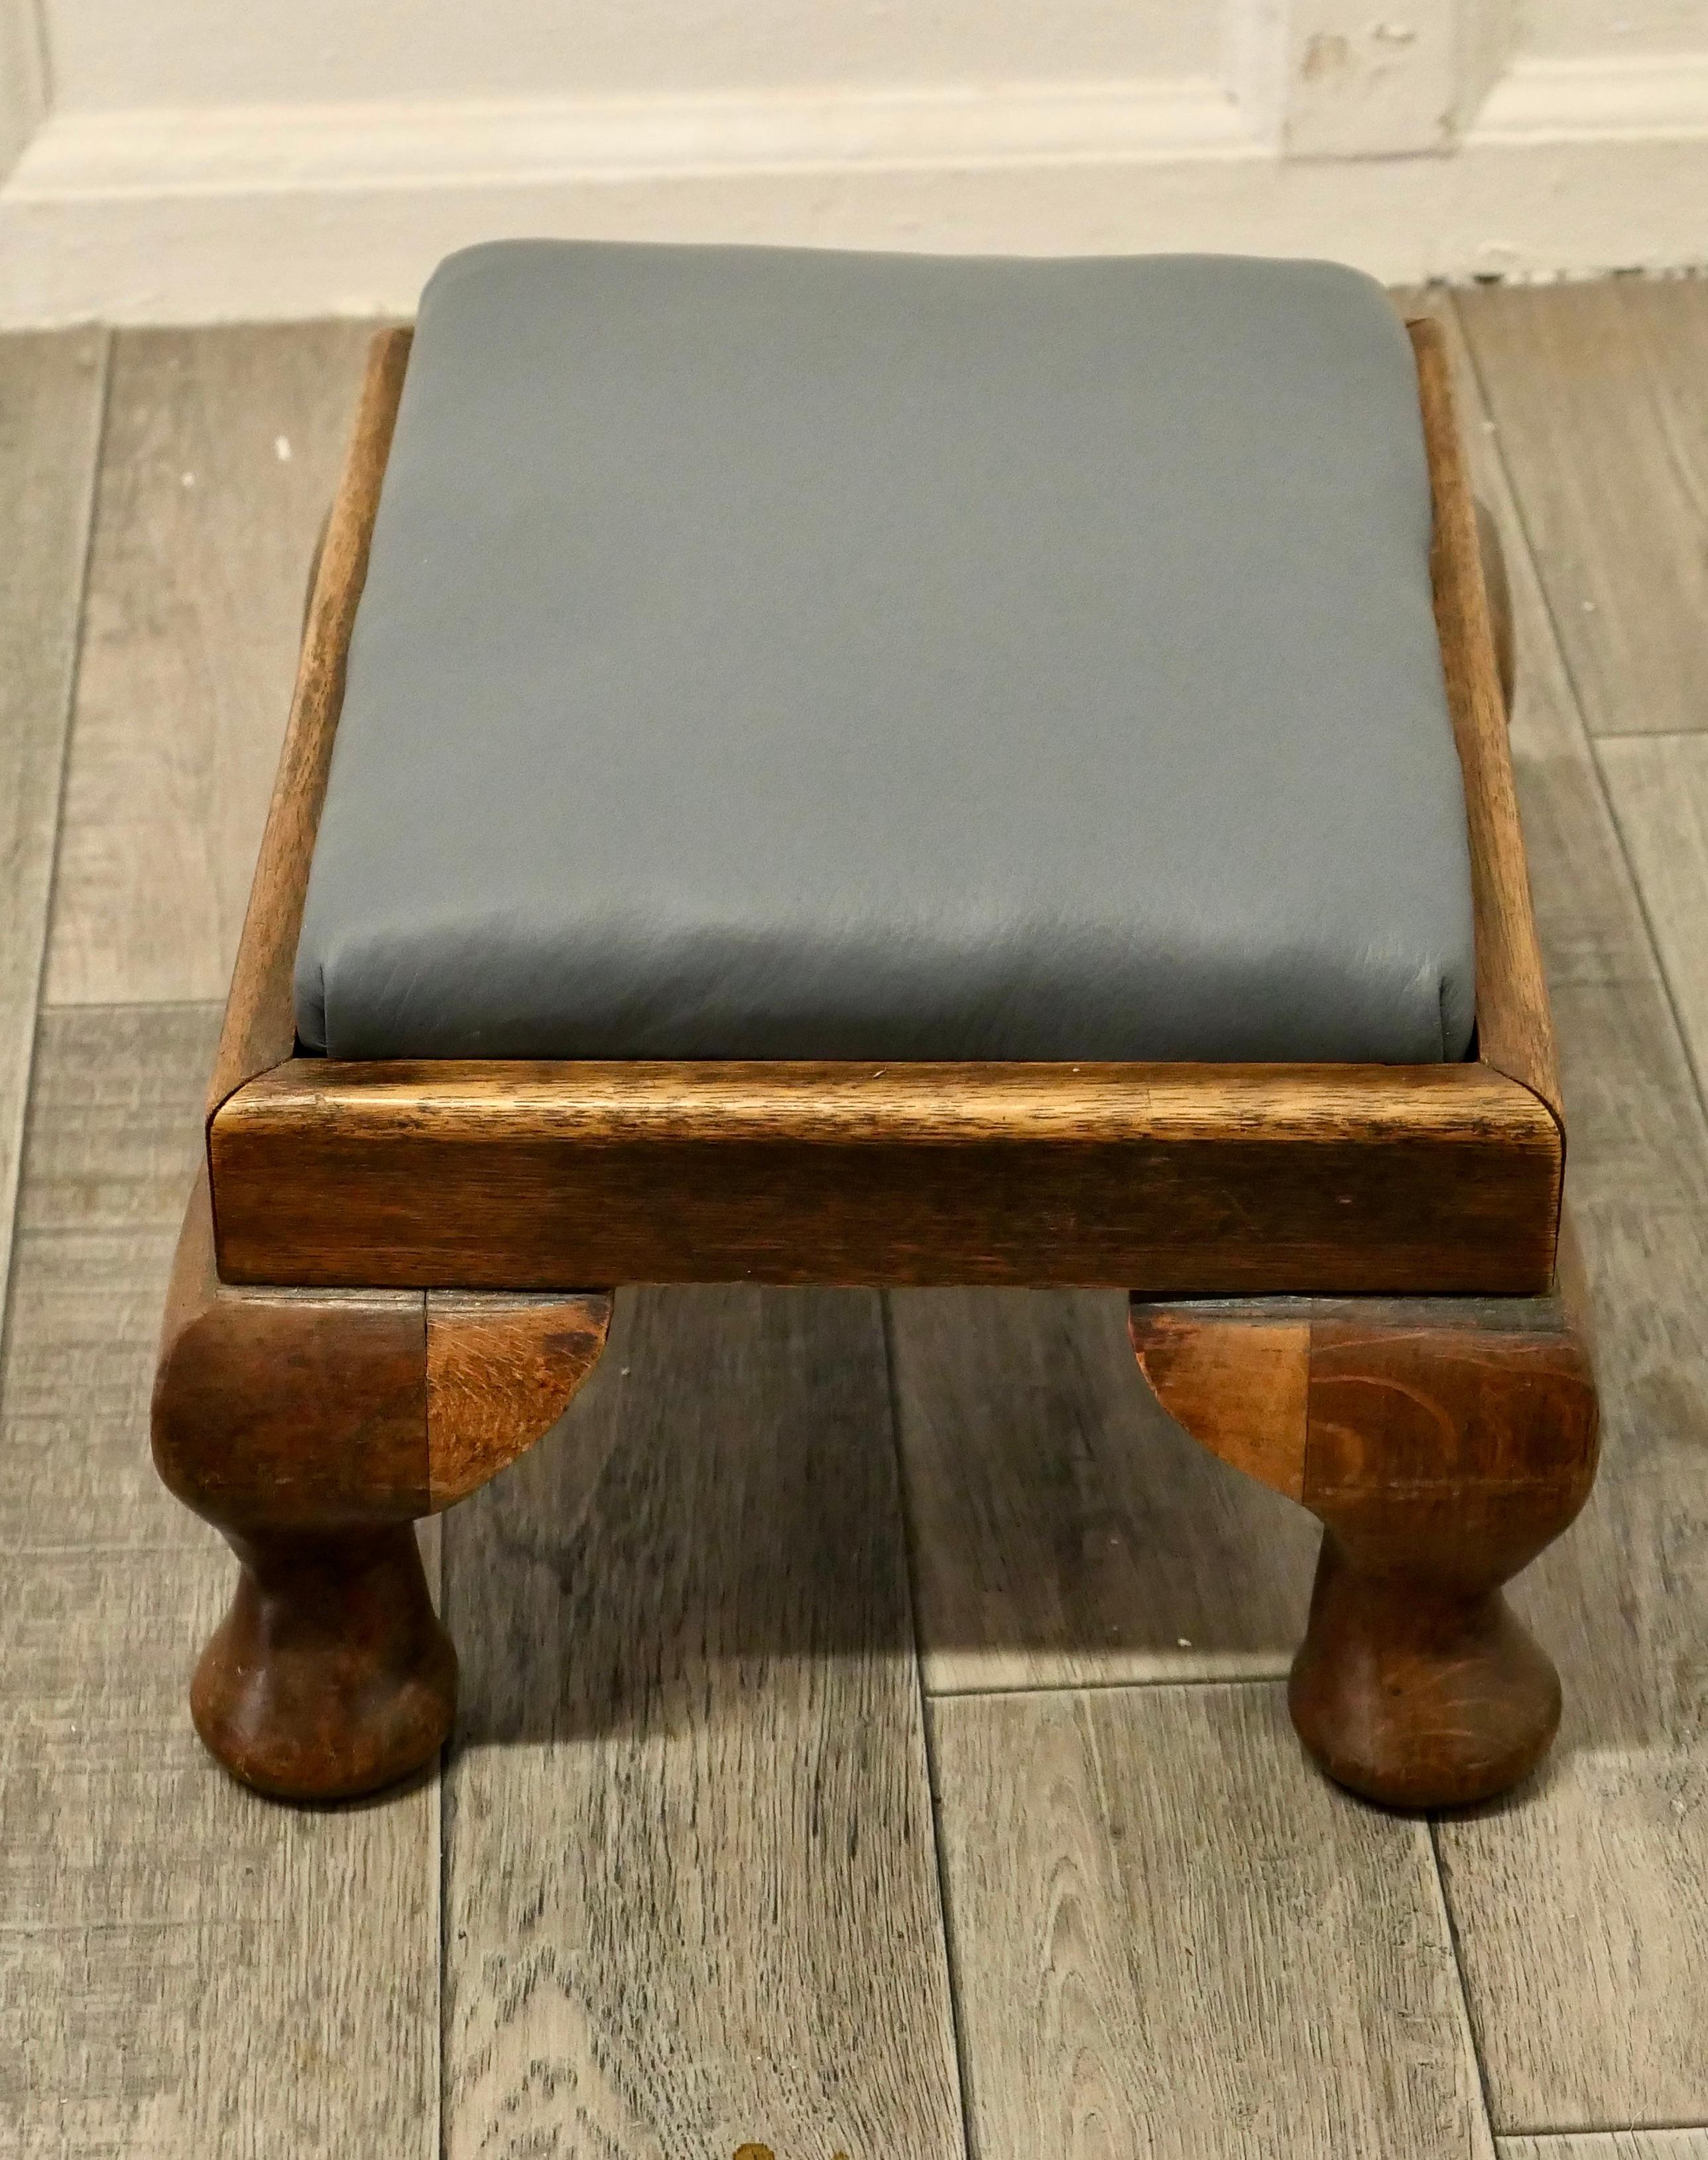 19th Century Victorian Country House Oak Foot Stool Upholstered in Soft Leather    